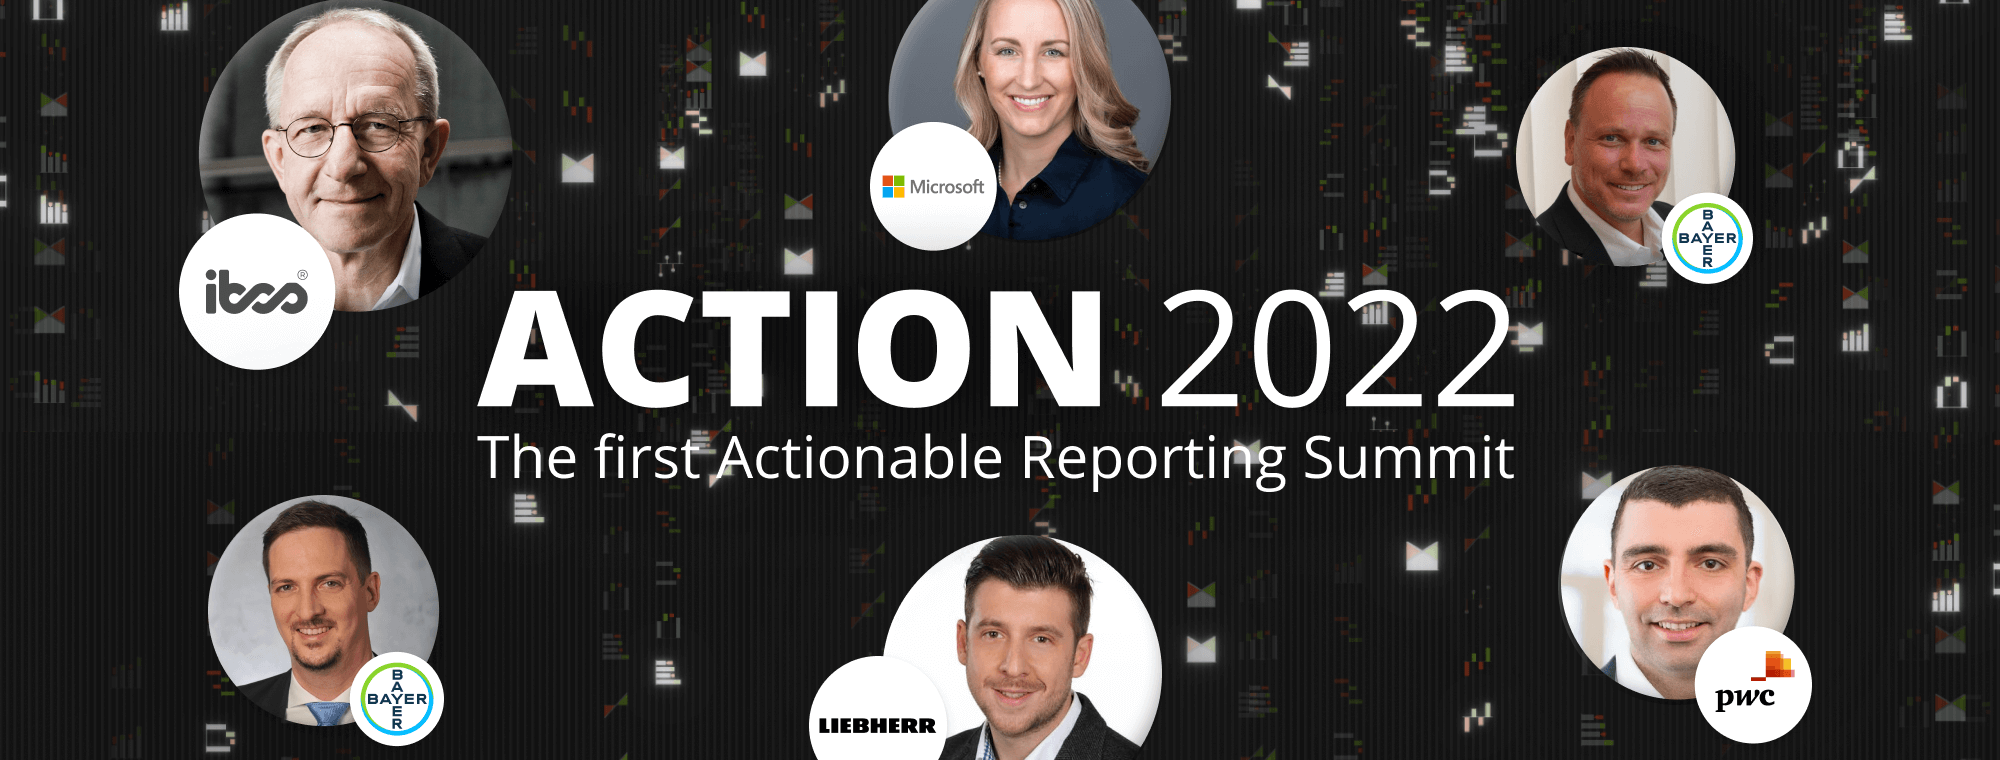 Action 2022 - the first Actionable Reporting Summit